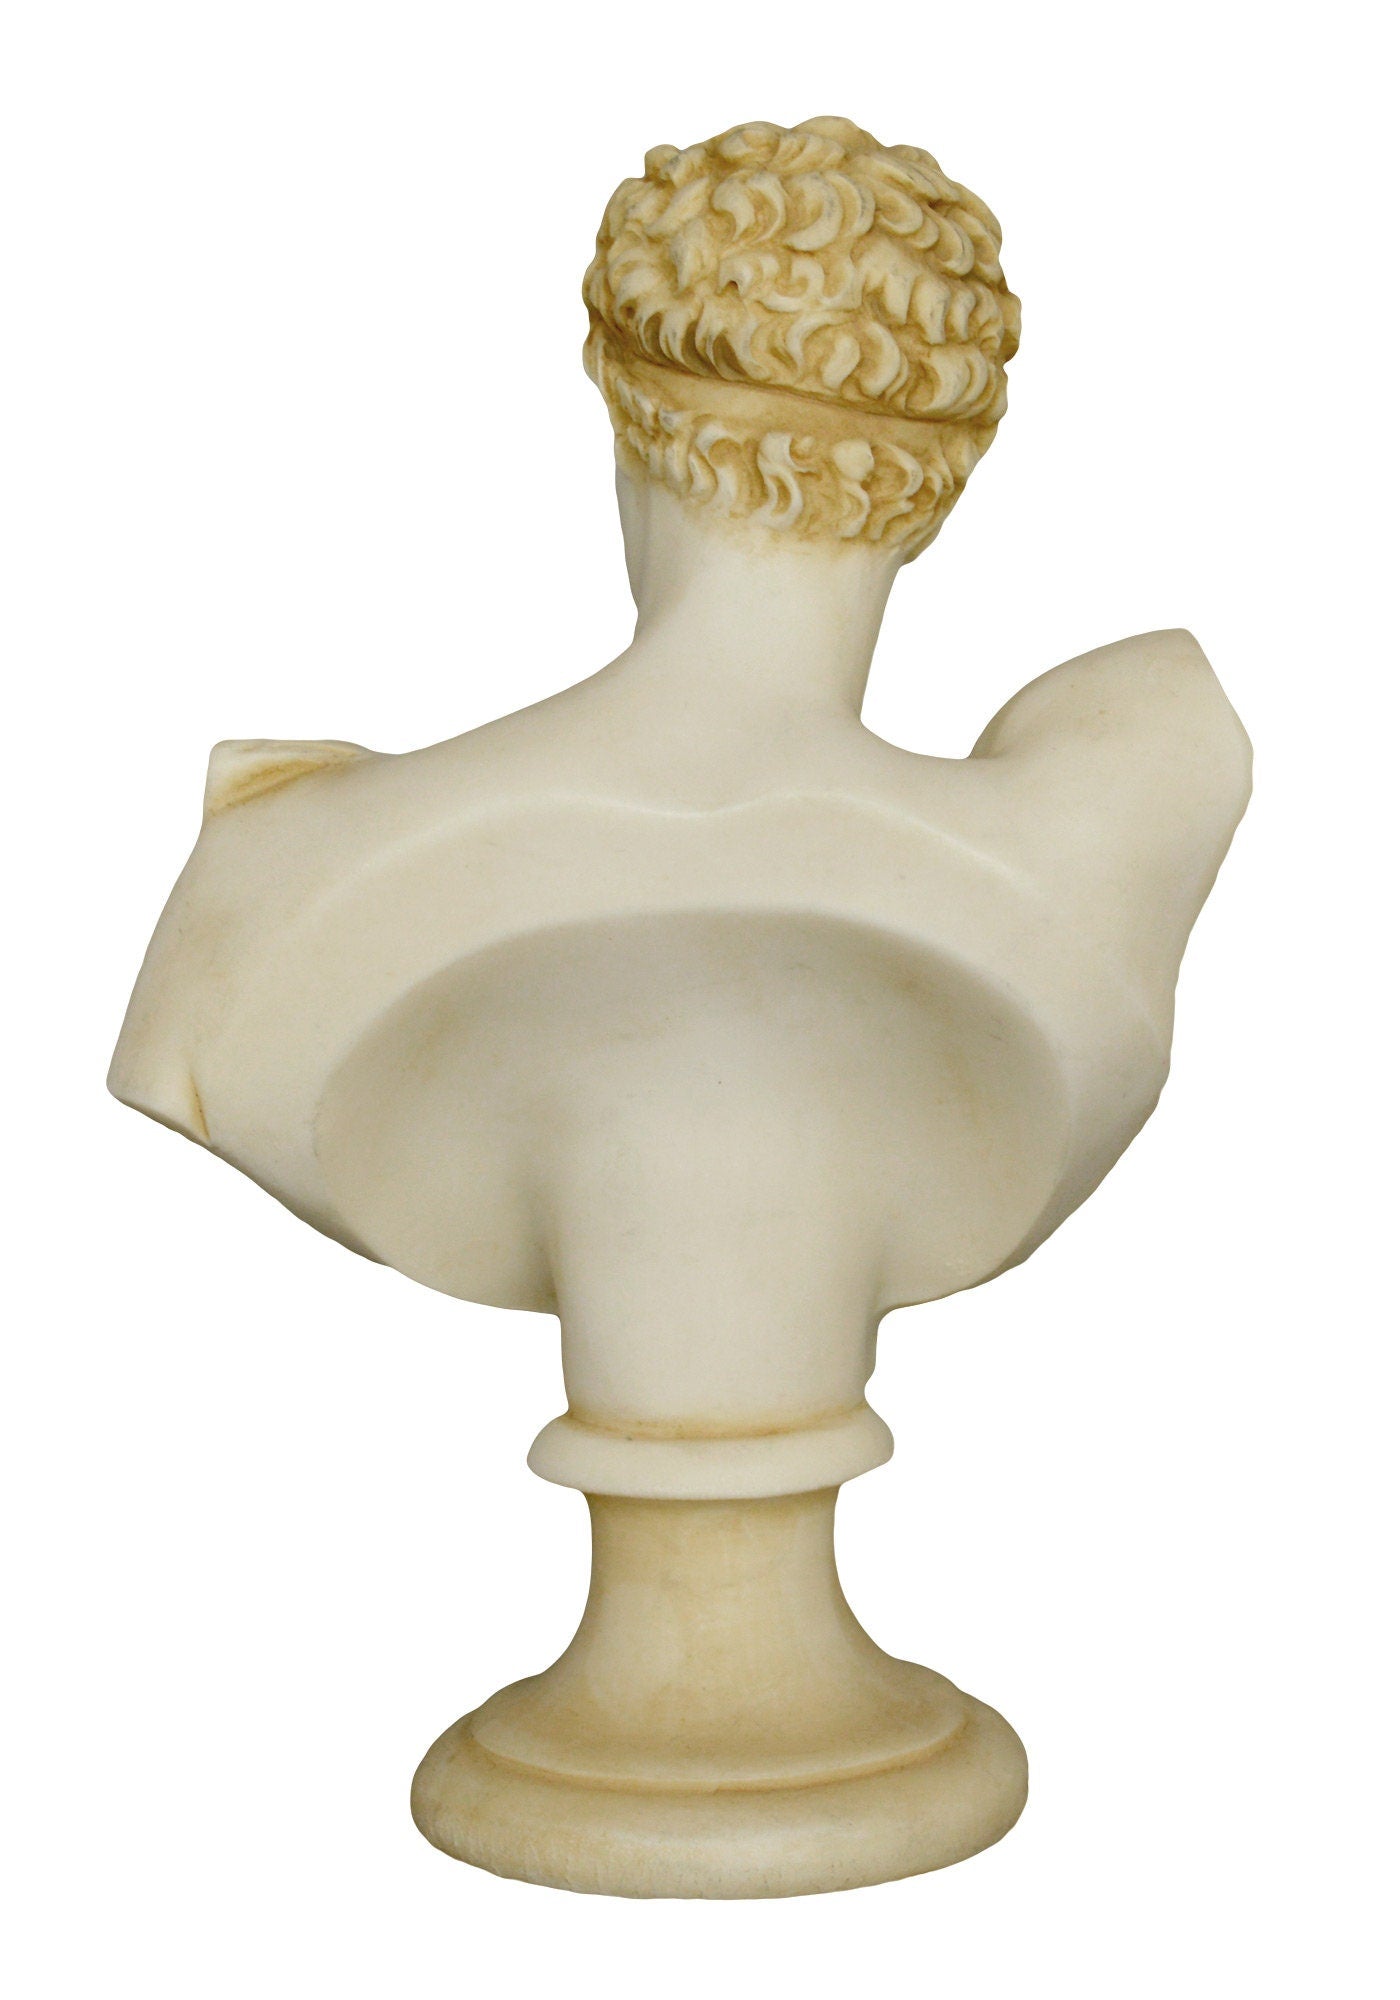 Hermes Mercury Bust - God of Trade, Wealth, Luck, Fertility, Animal Husbandry, Sleep, Language, Thieves, and Travel - Aged Alabaster Statue